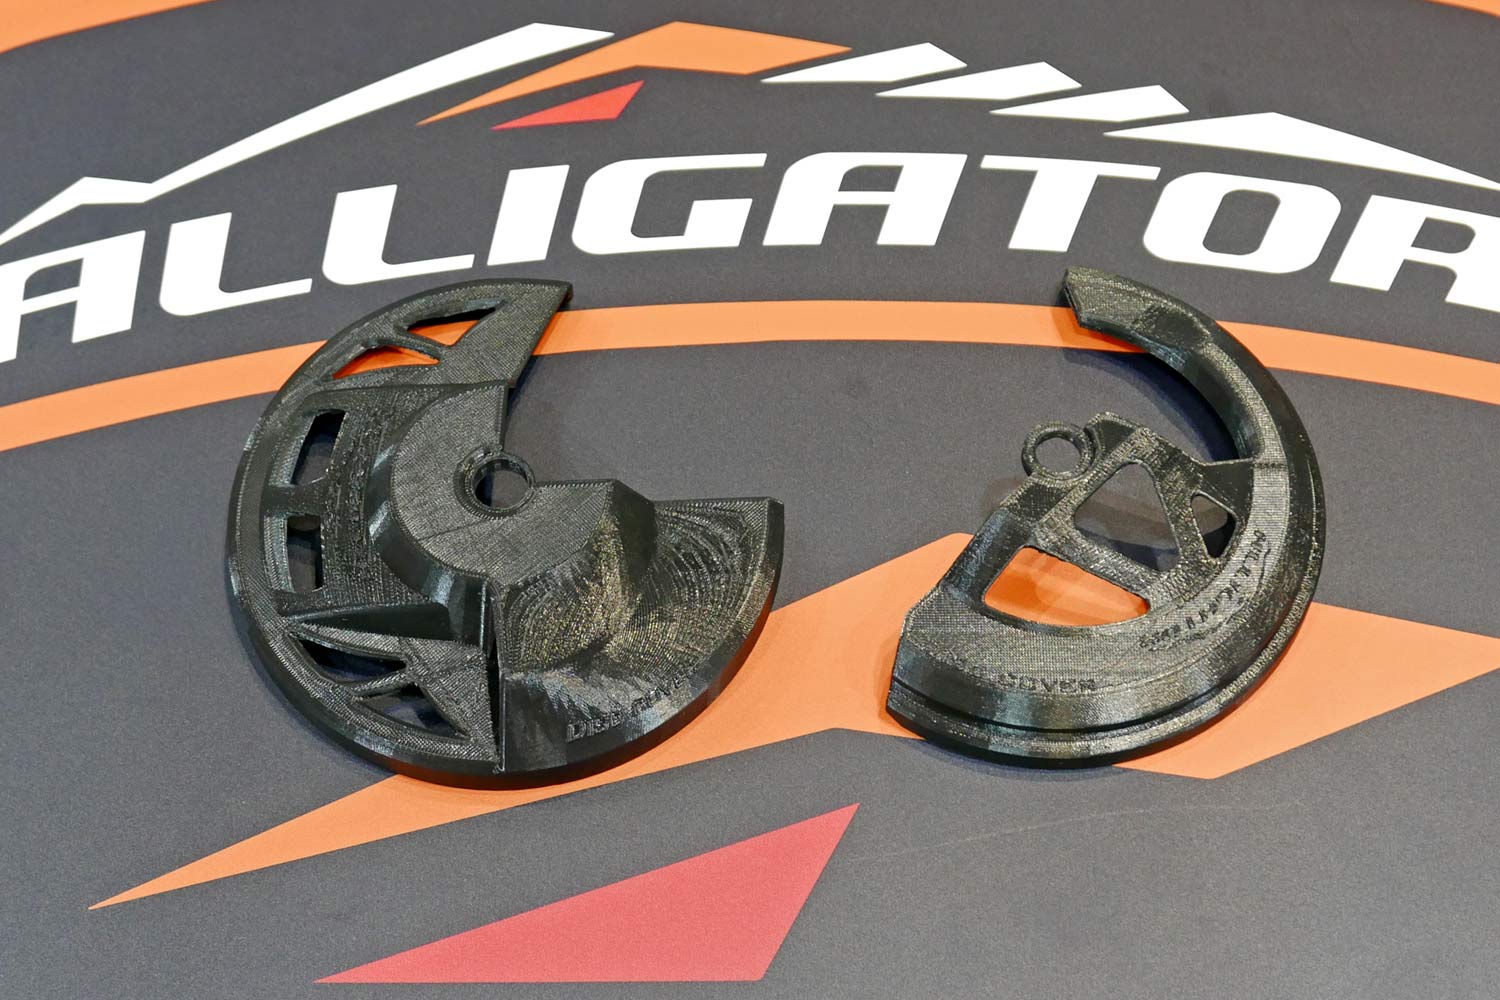 Taipei: Alligator prototype rotor covers prevent disc brake pads from overheating